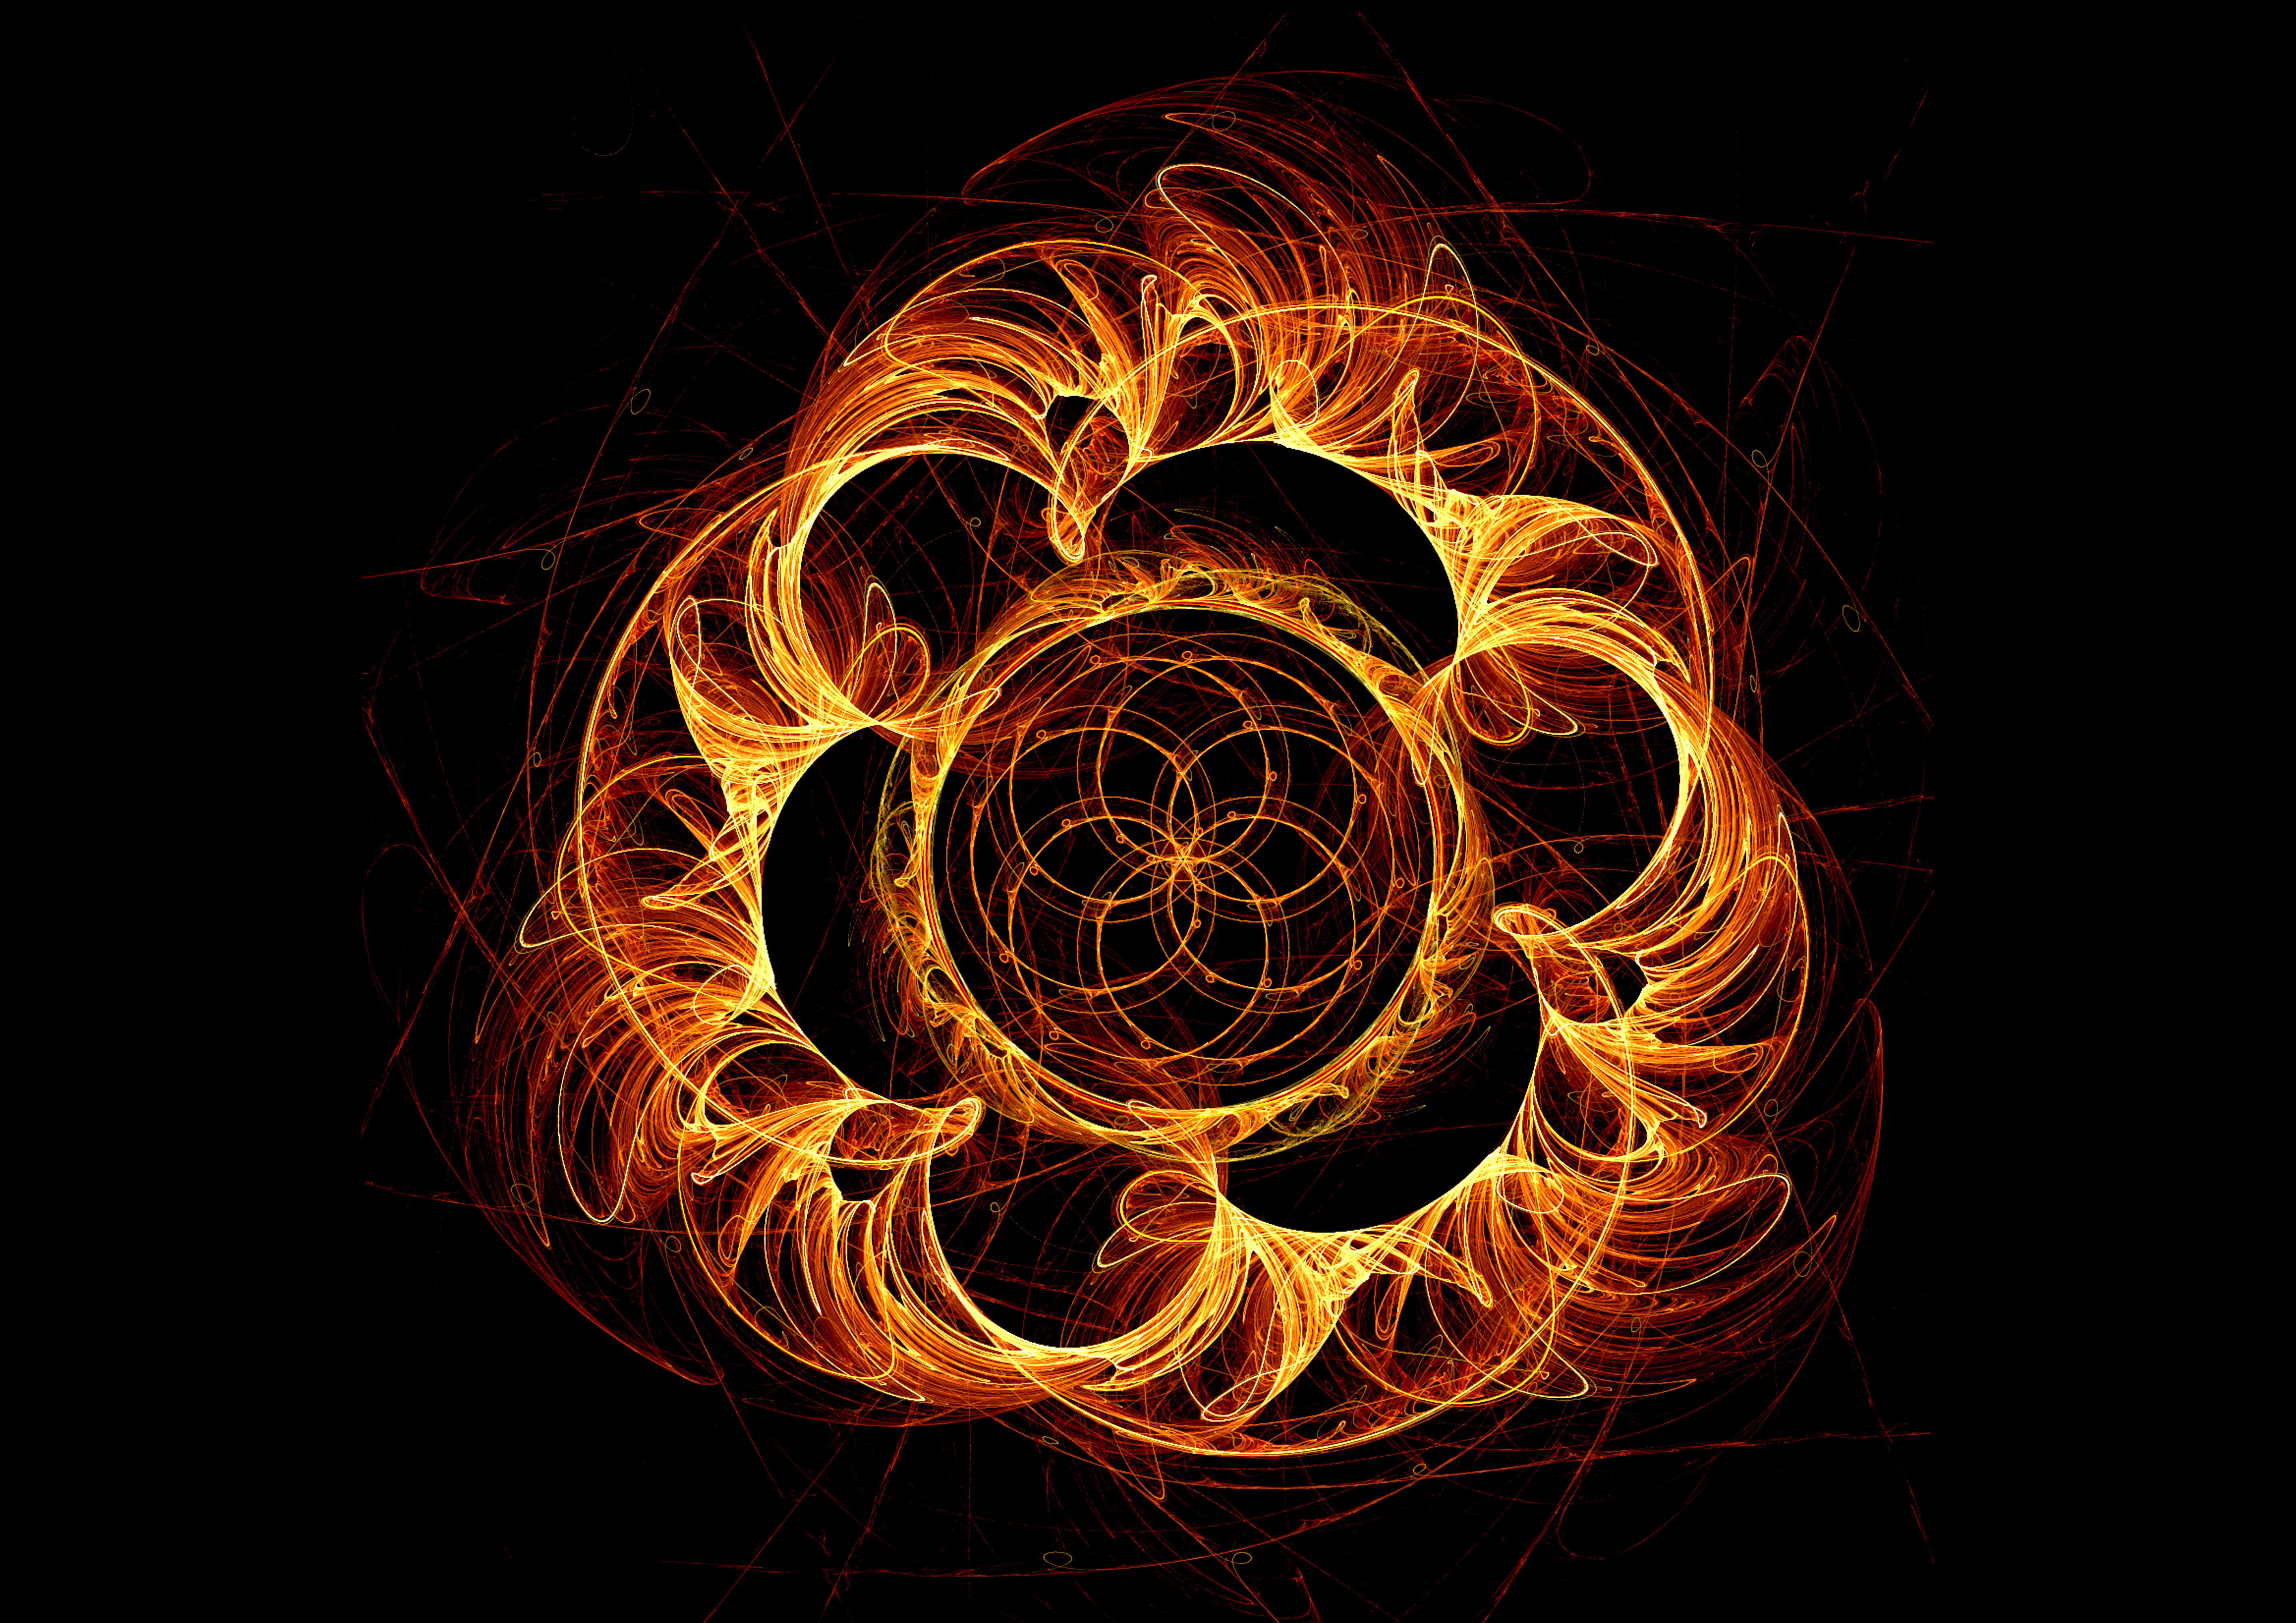 abstract, bright, fractal, confused, intricate, flaming, swirling, involute, fiery FHD, 4K, UHD